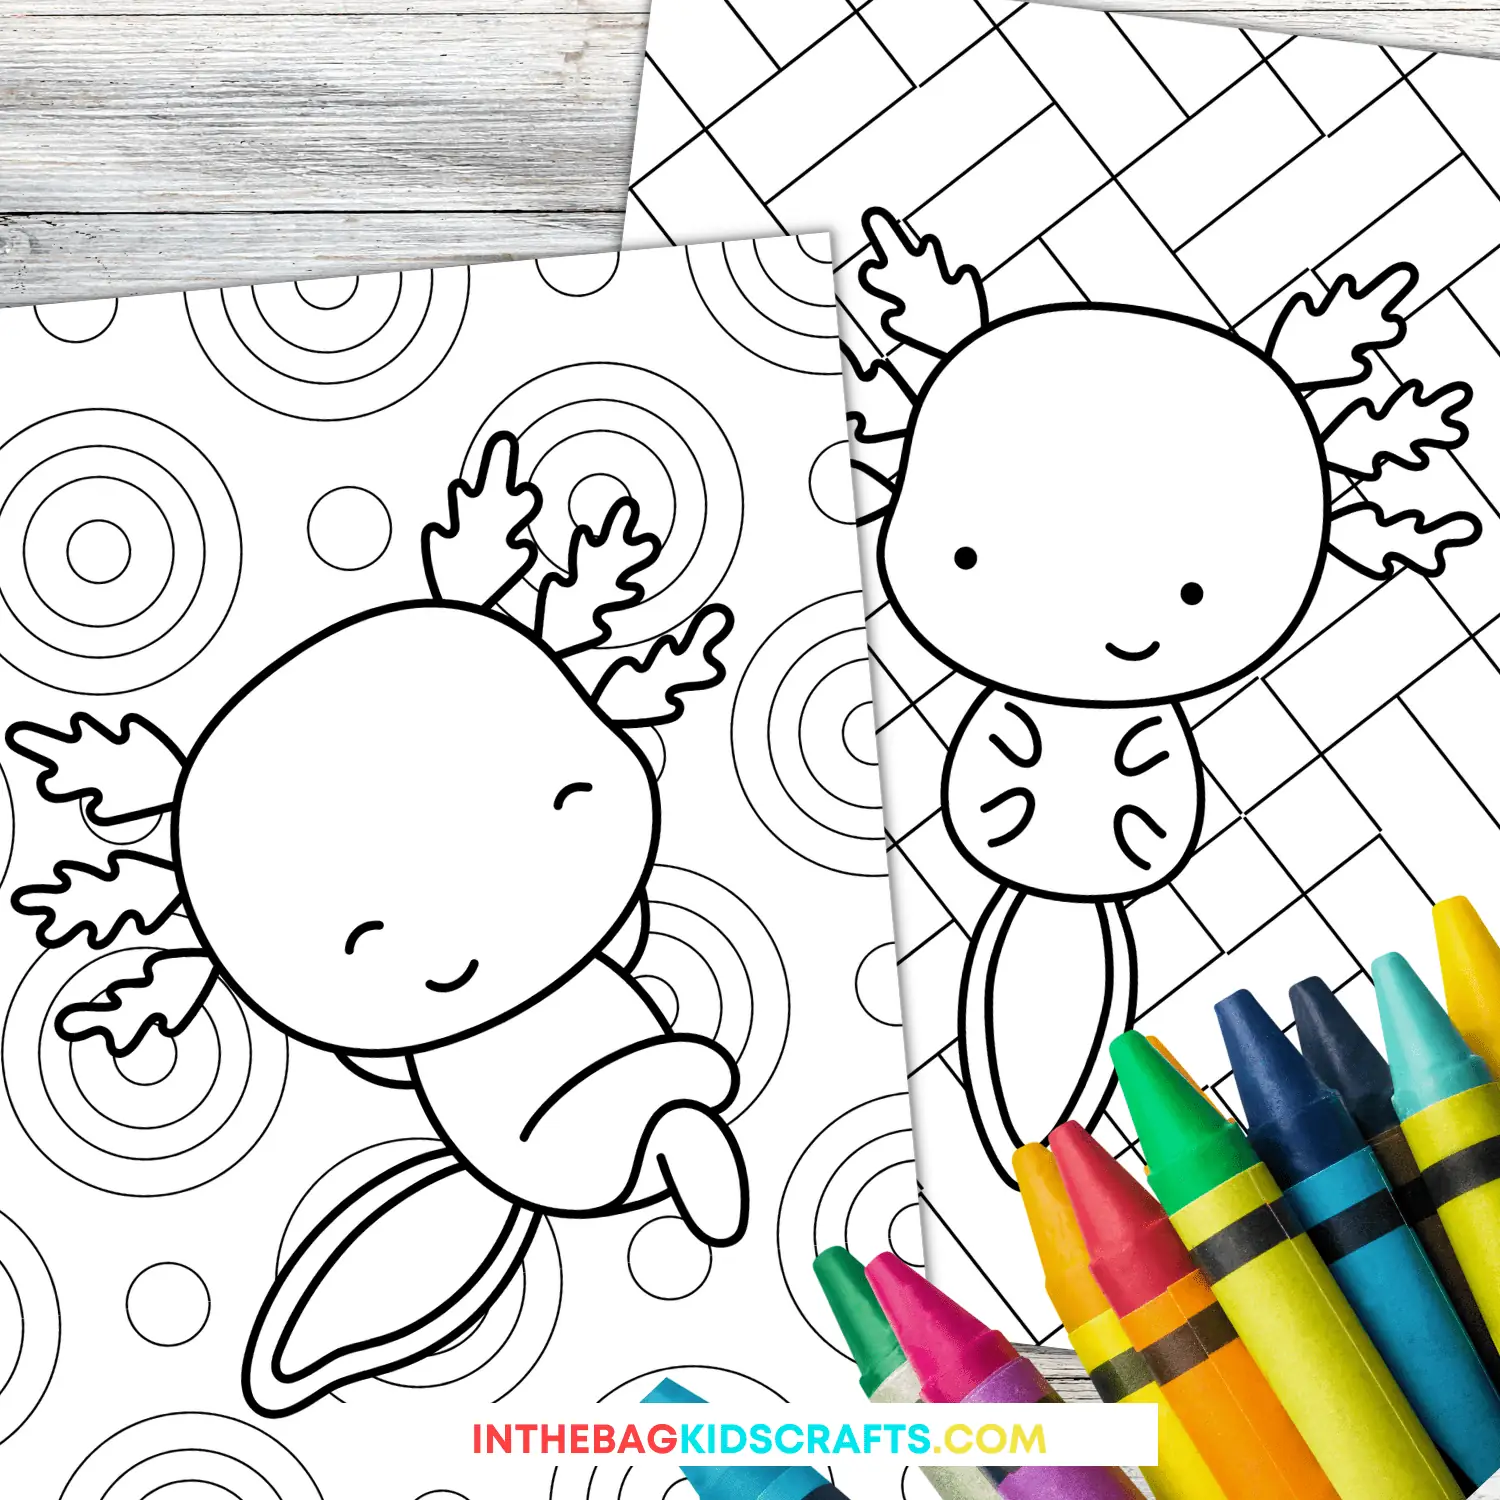 Axolotl coloring pages free printables â in the bag kids crafts